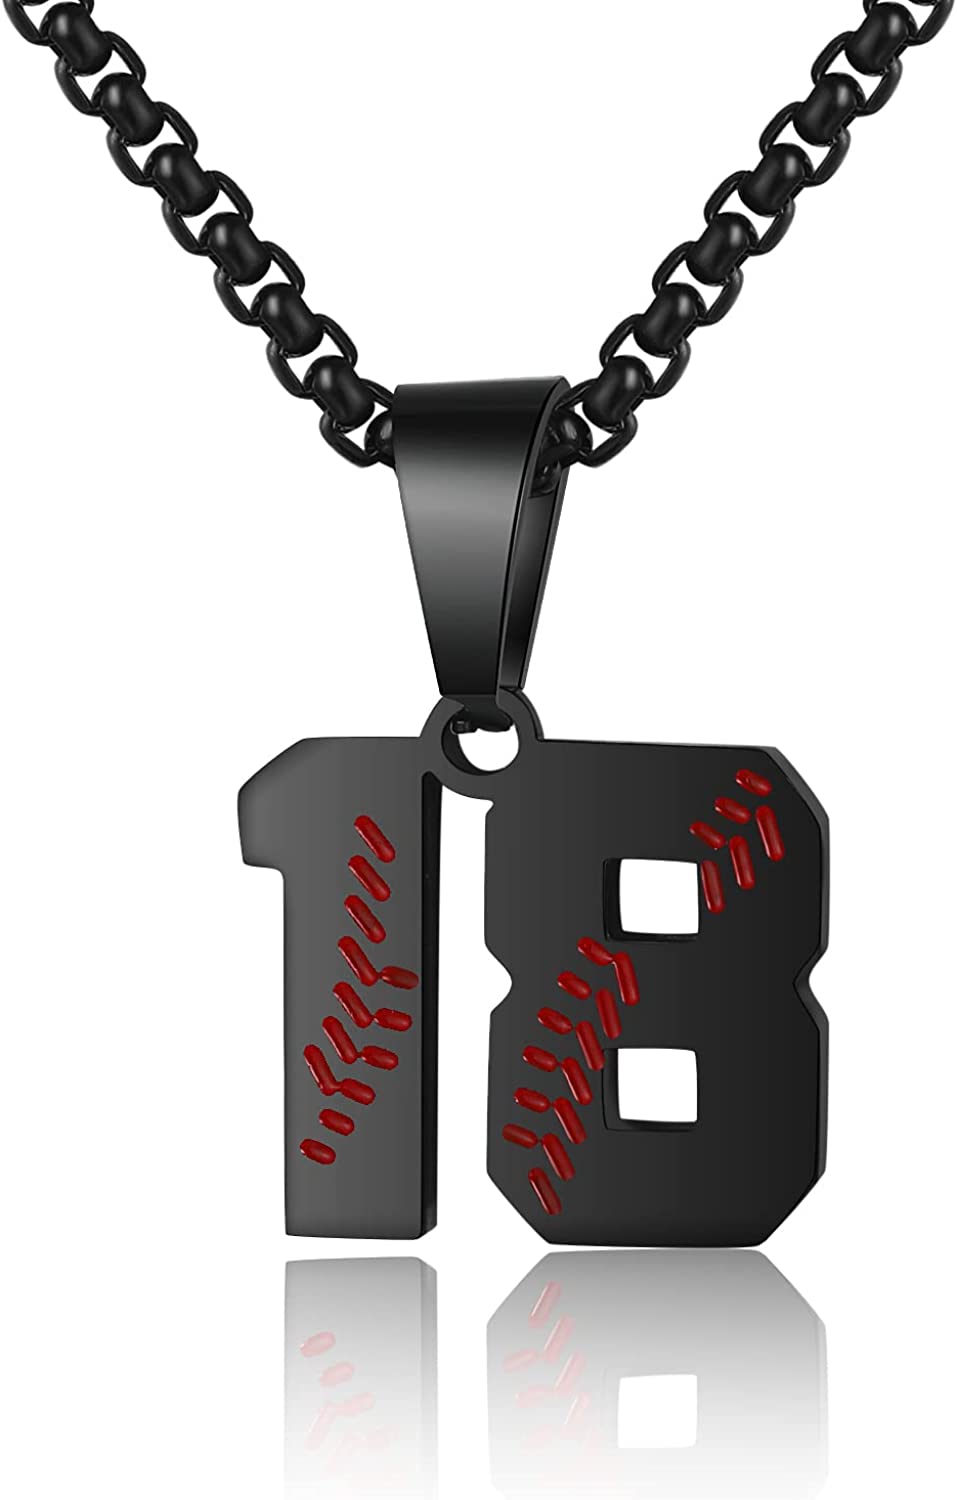 Titanium Triple The Rope Necklaces For Kids And Athletes Perfect For  Baseball, Tornado, And More! From Bbsports, $0.97 | DHgate.Com